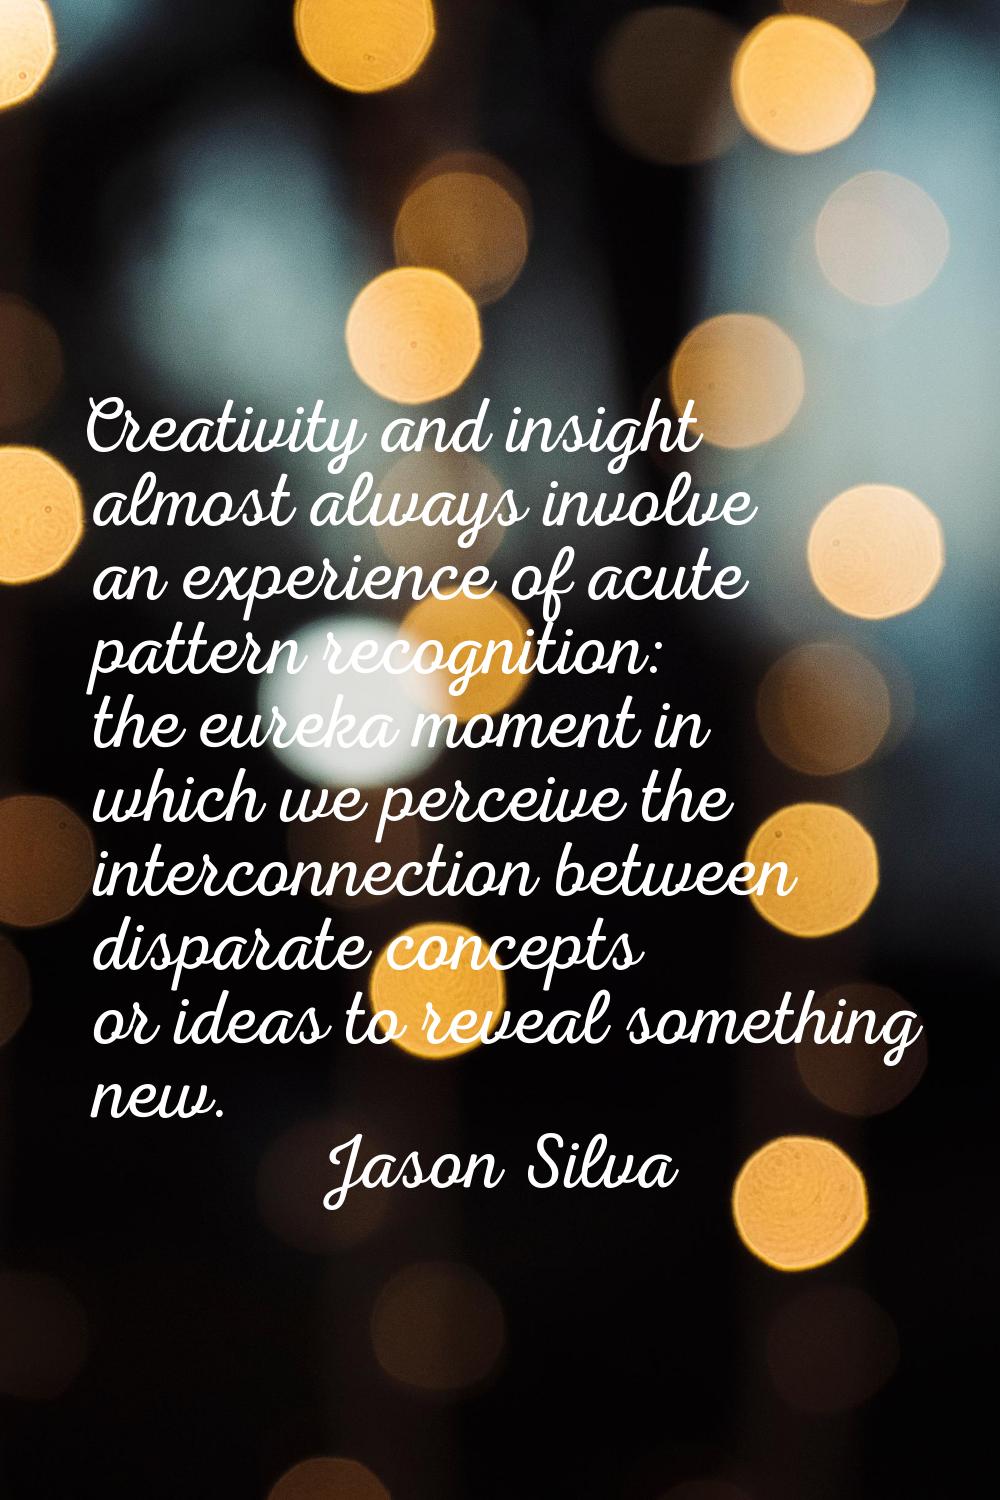 Creativity and insight almost always involve an experience of acute pattern recognition: the eureka